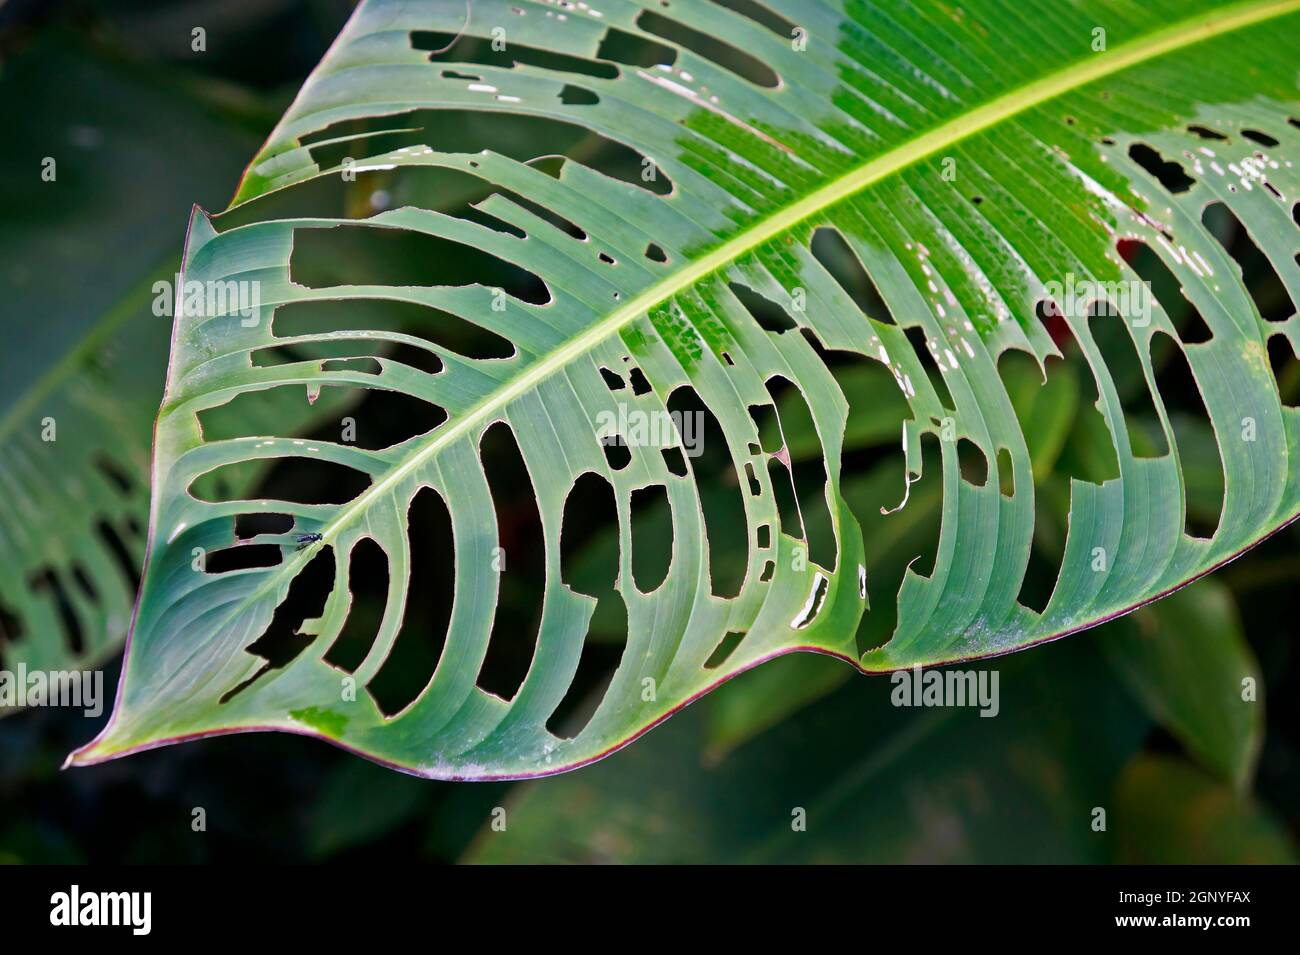 Heliconia leaf eaten by caterpillars Stock Photo